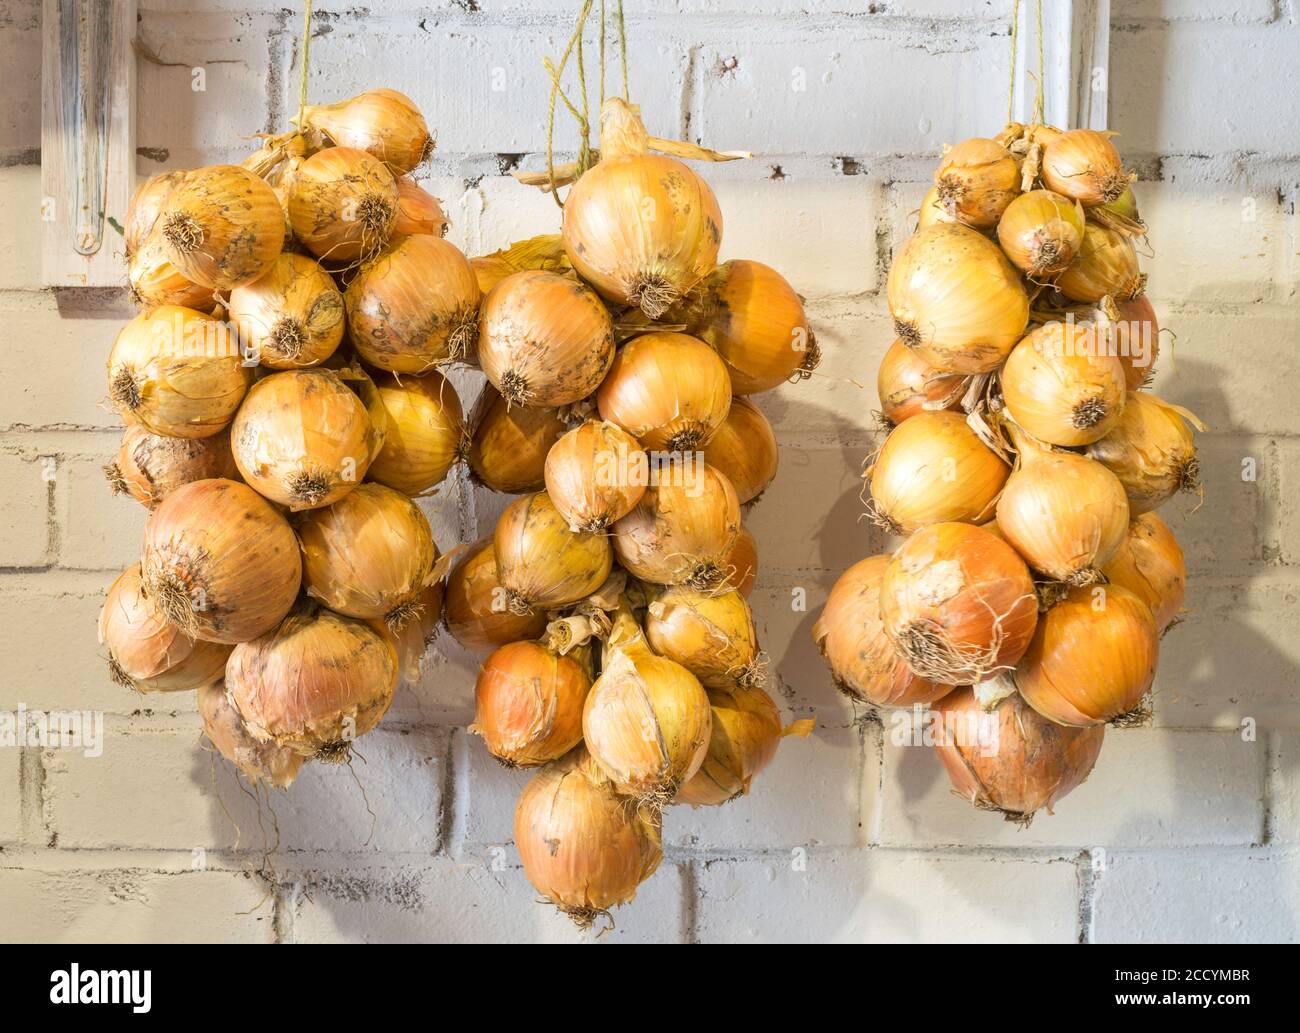 Strings of onions stored hanging within a garage Stock Photo